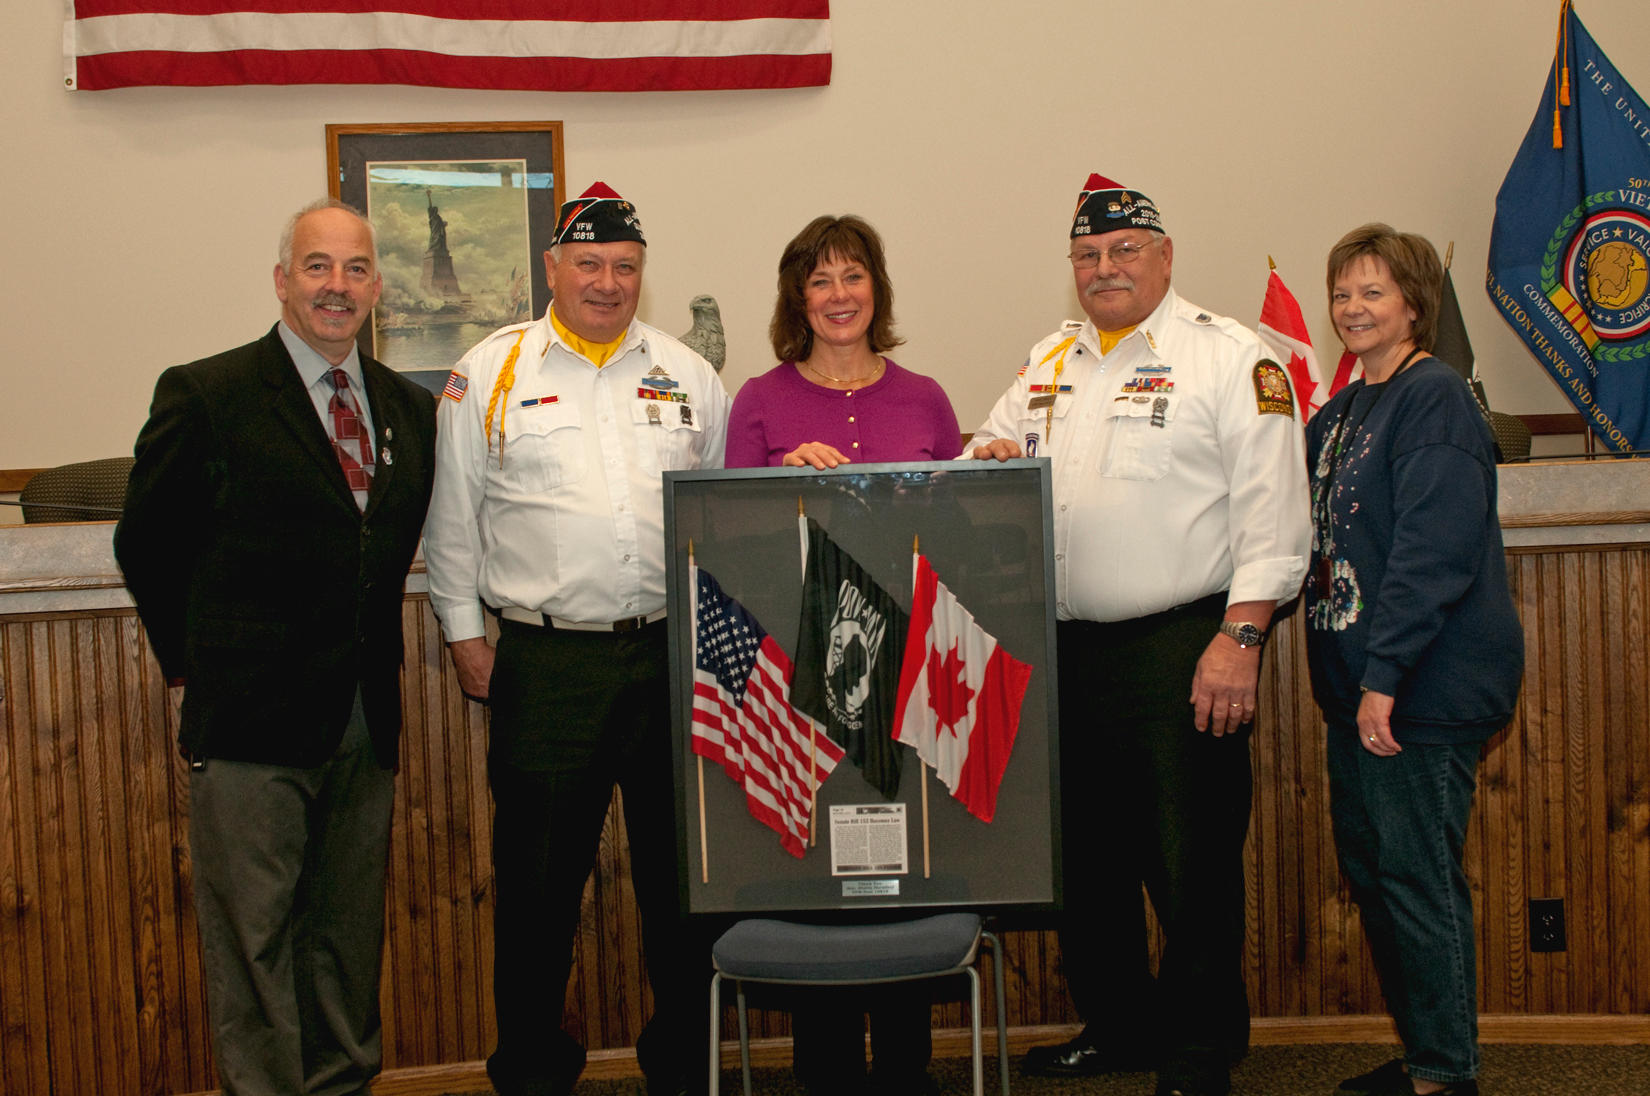 Those attending the presentation are (from the left) New Richmond Mayor Fred Horne, VFW Post 10818 member Ken House, State Sen. Sheila Harsdorf, VFW Post 10818 member Dave Green, CVSO Technician Geri Campbell. (Photo by Tom Lindfors)